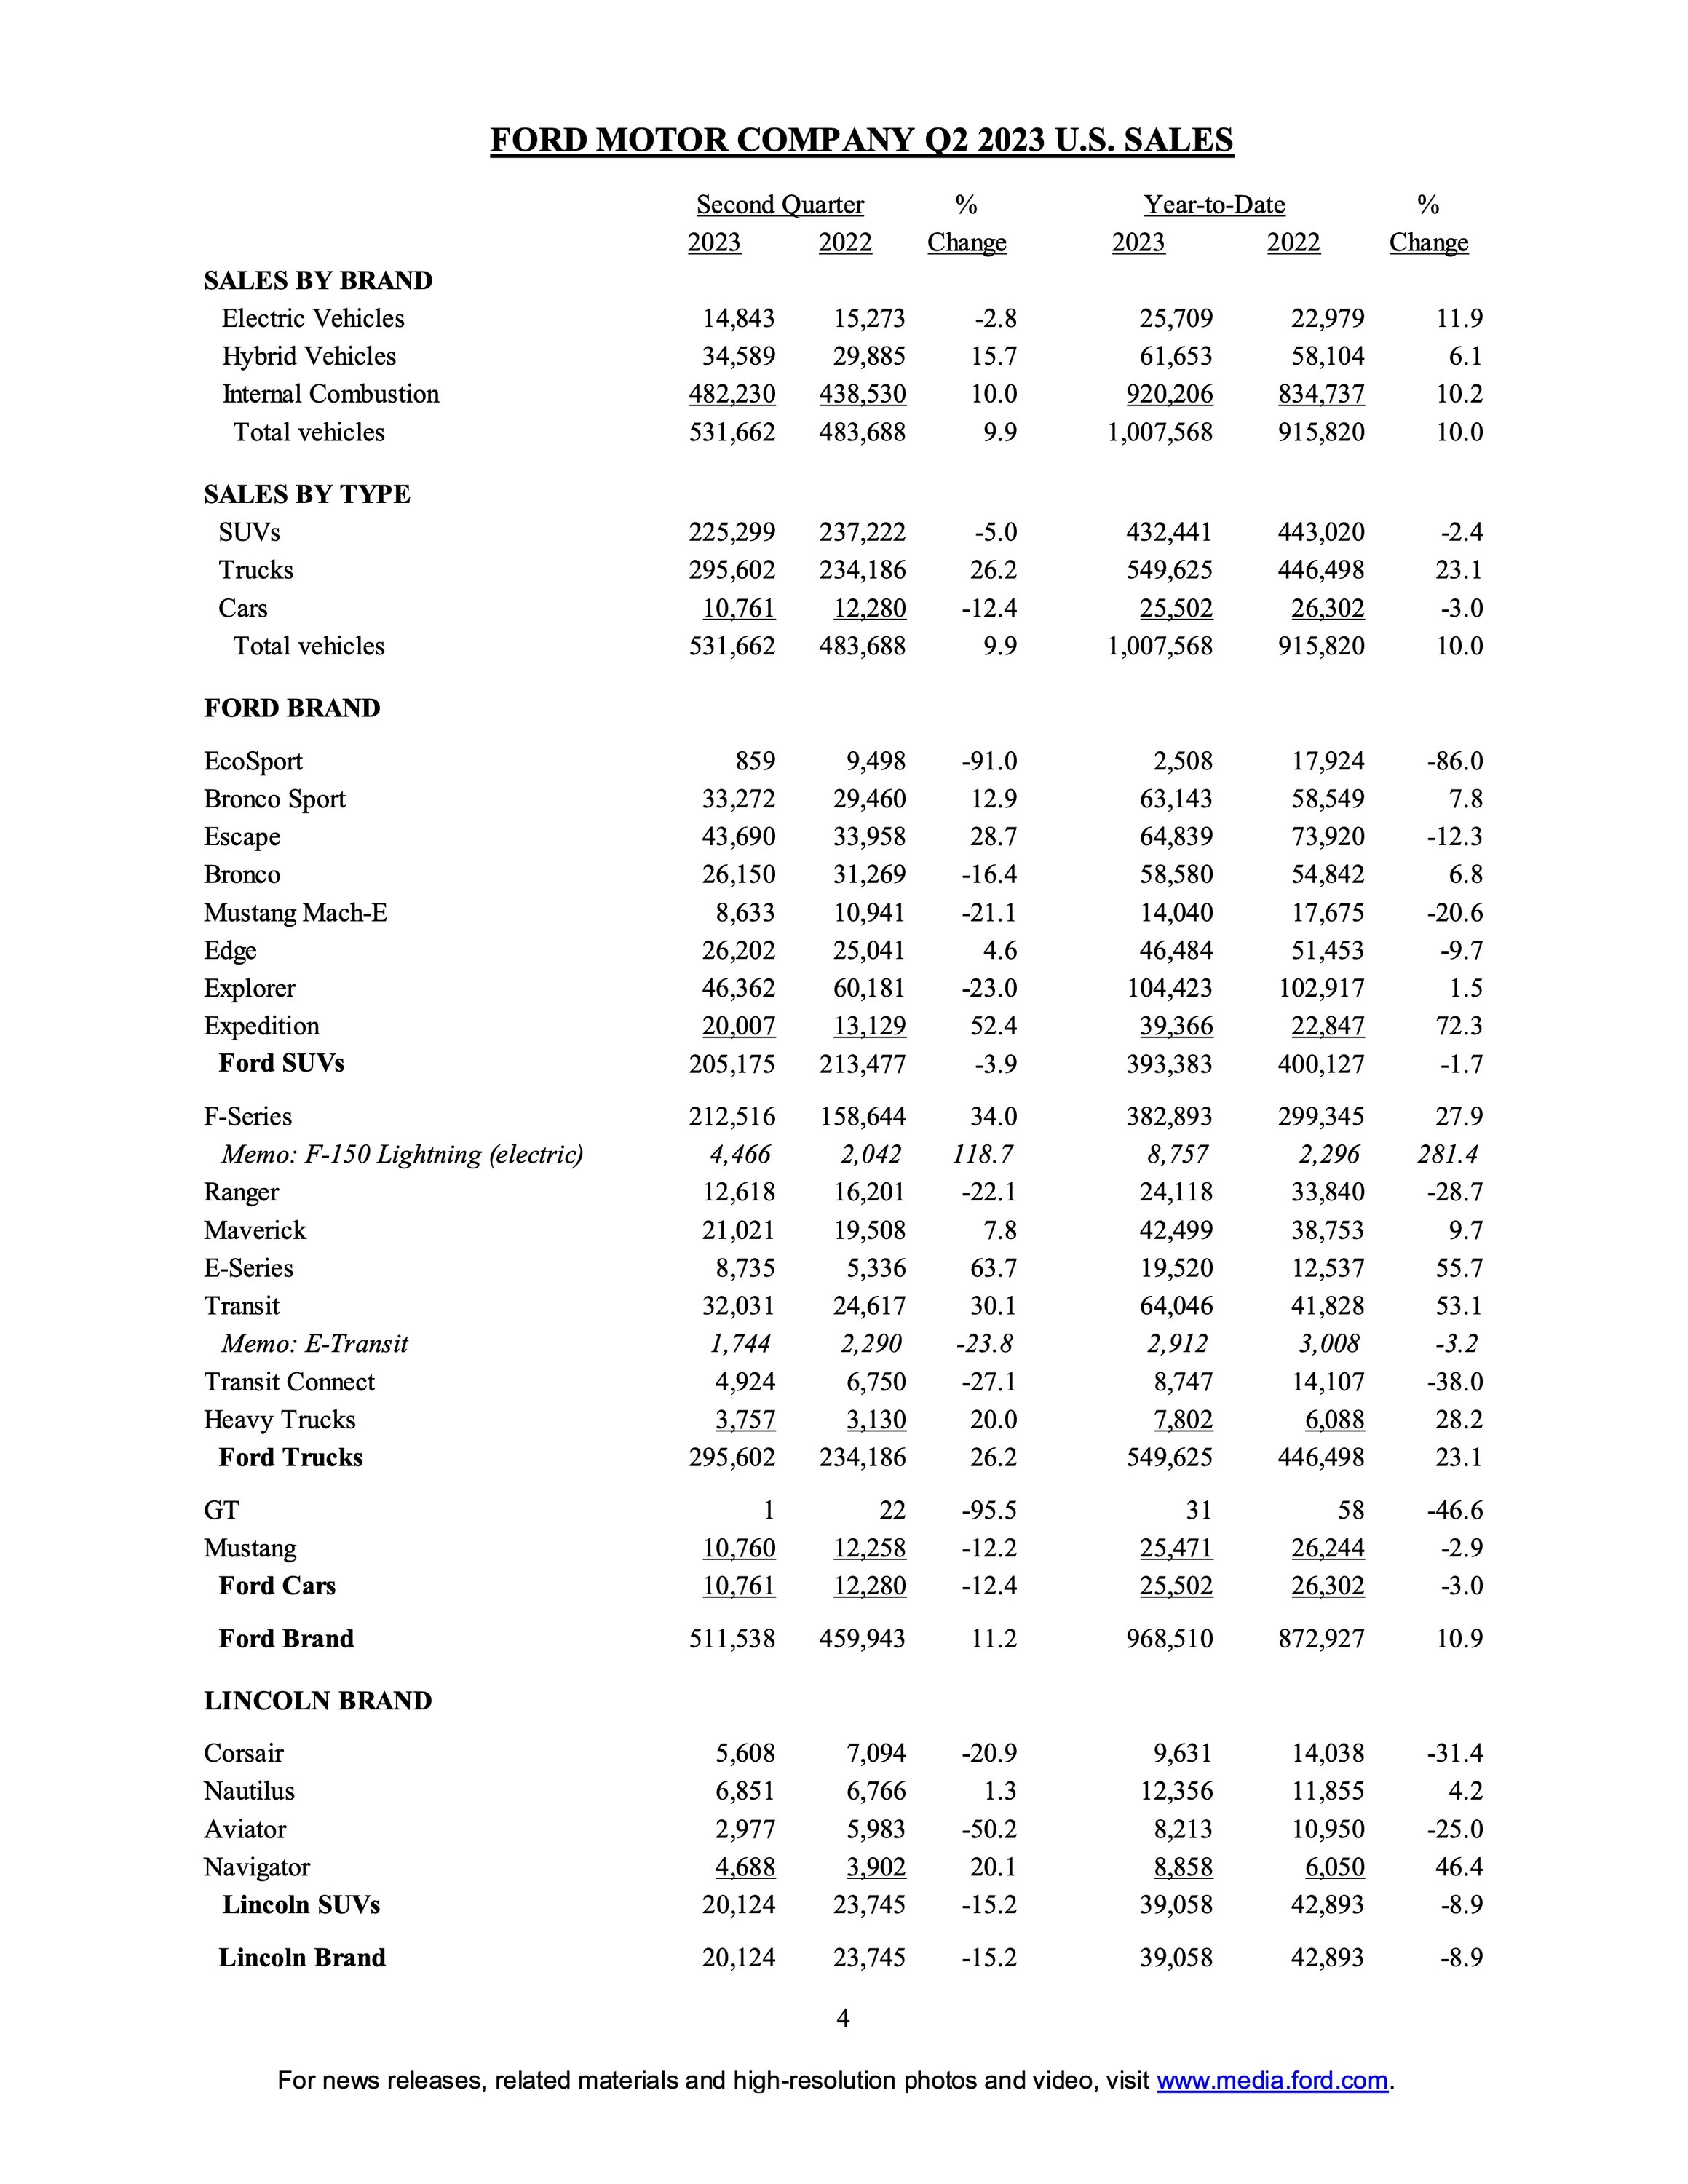 S650 Mustang Mustang Q2 2023 Sales / Production Results page 4